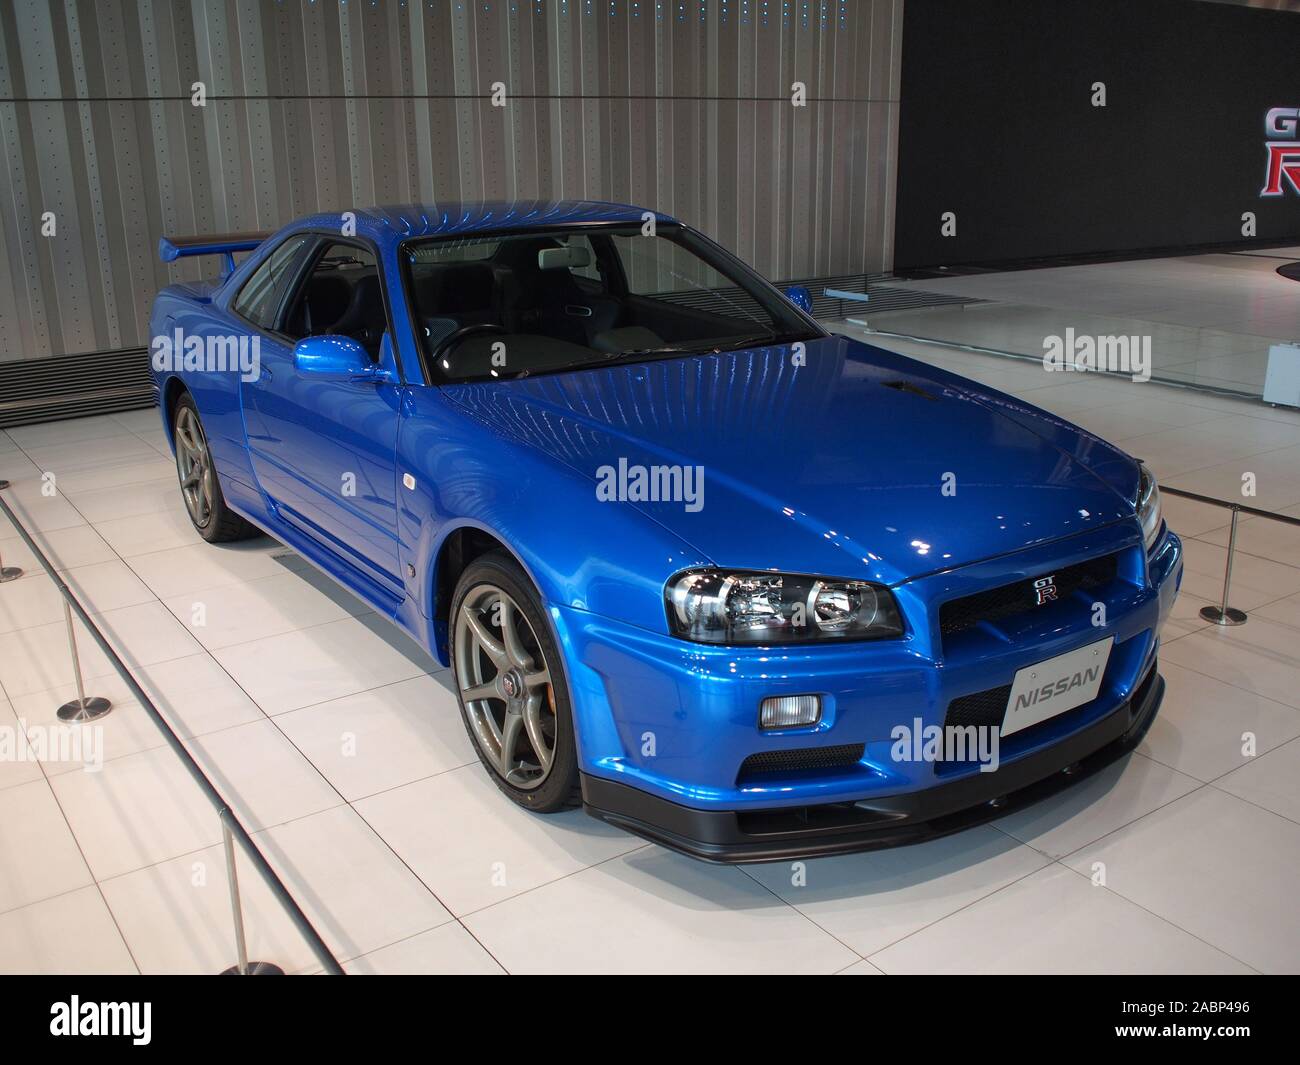 YOKOHAMA, JAPAN - July 2nd, 2019: 2000 Nissan Skyline GT-R V-spec II, one  of the cars exhibited at the Nissan Global Headquarters Gallery Stock Photo  - Alamy